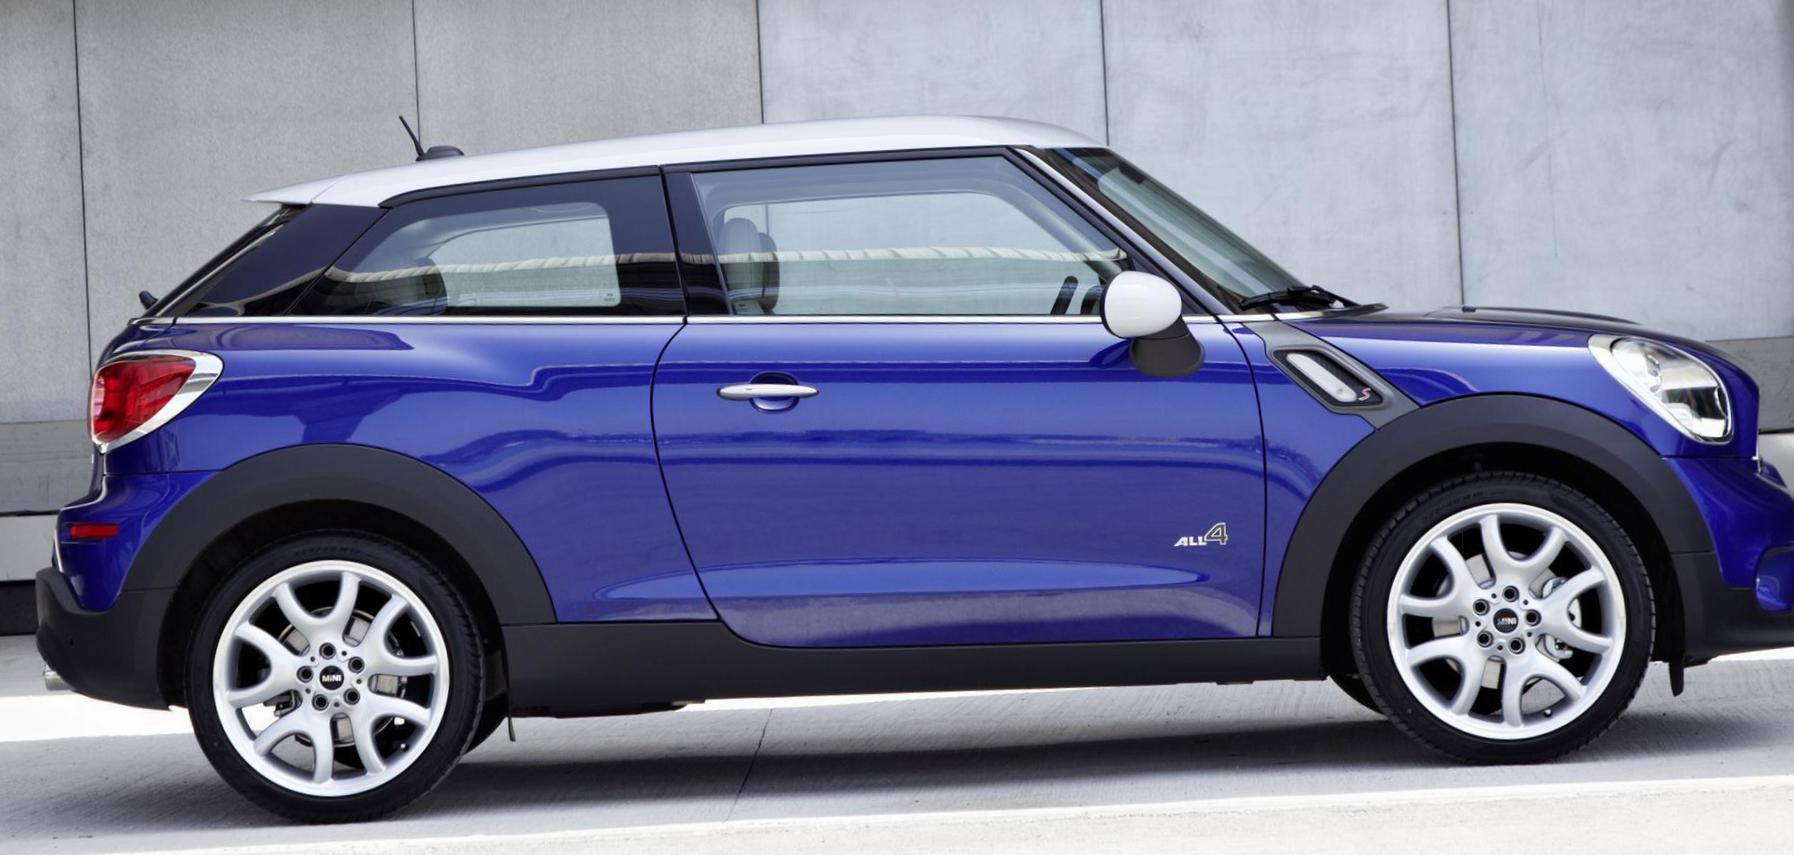 Cooper Paceman MINI Specifications hatchback